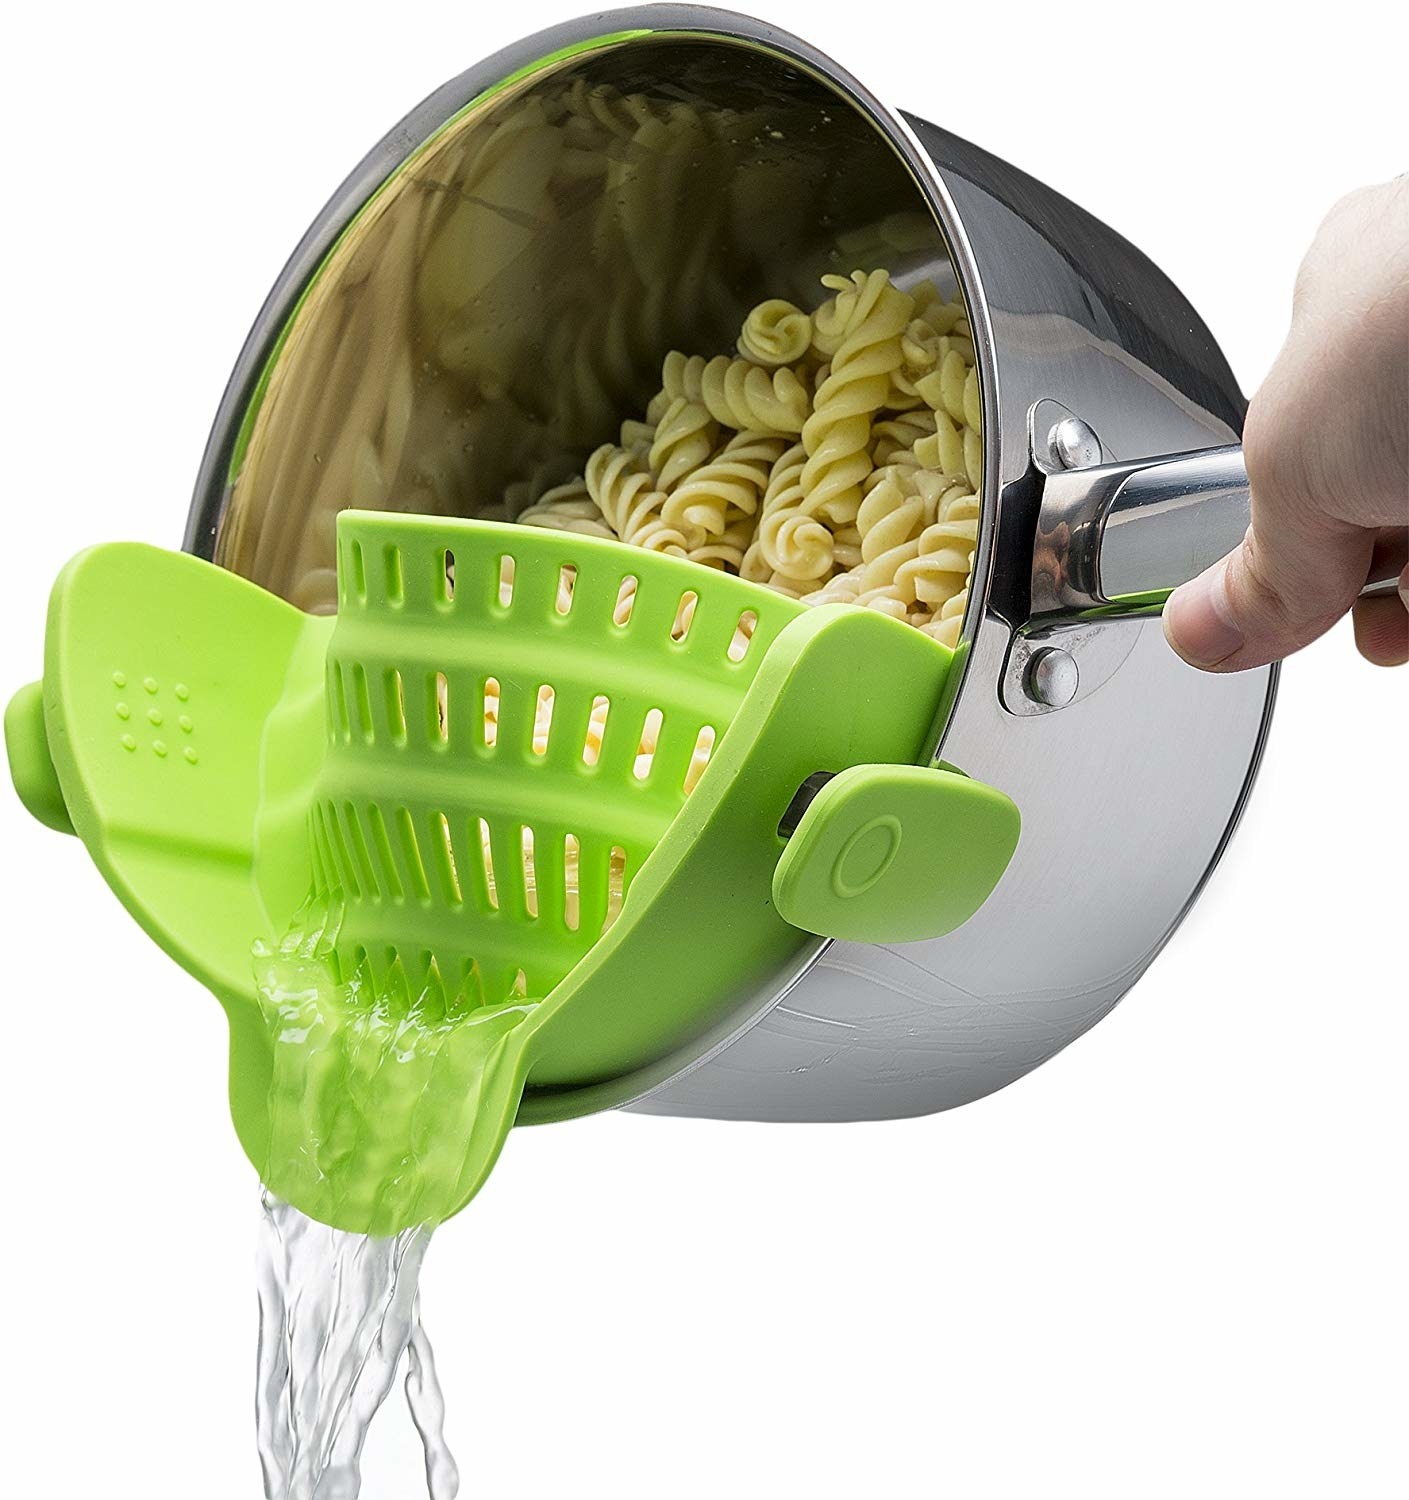 Fun Kitchen Accessories That Make Cooking a Delight – Ideal